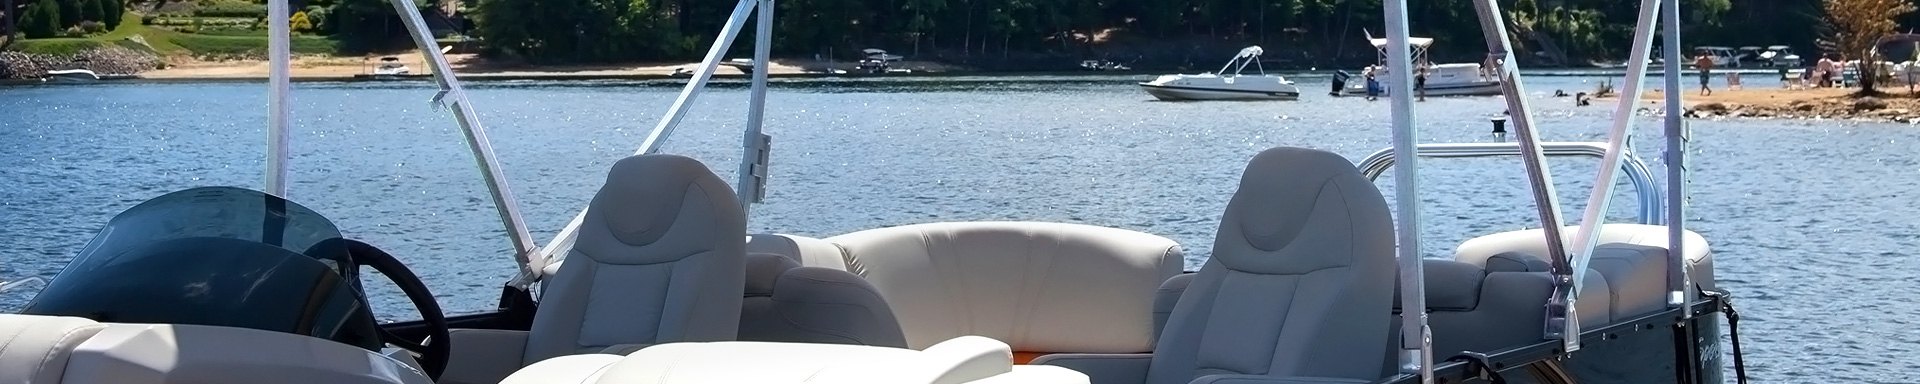 8 Pontoon Boat Accessories You Need